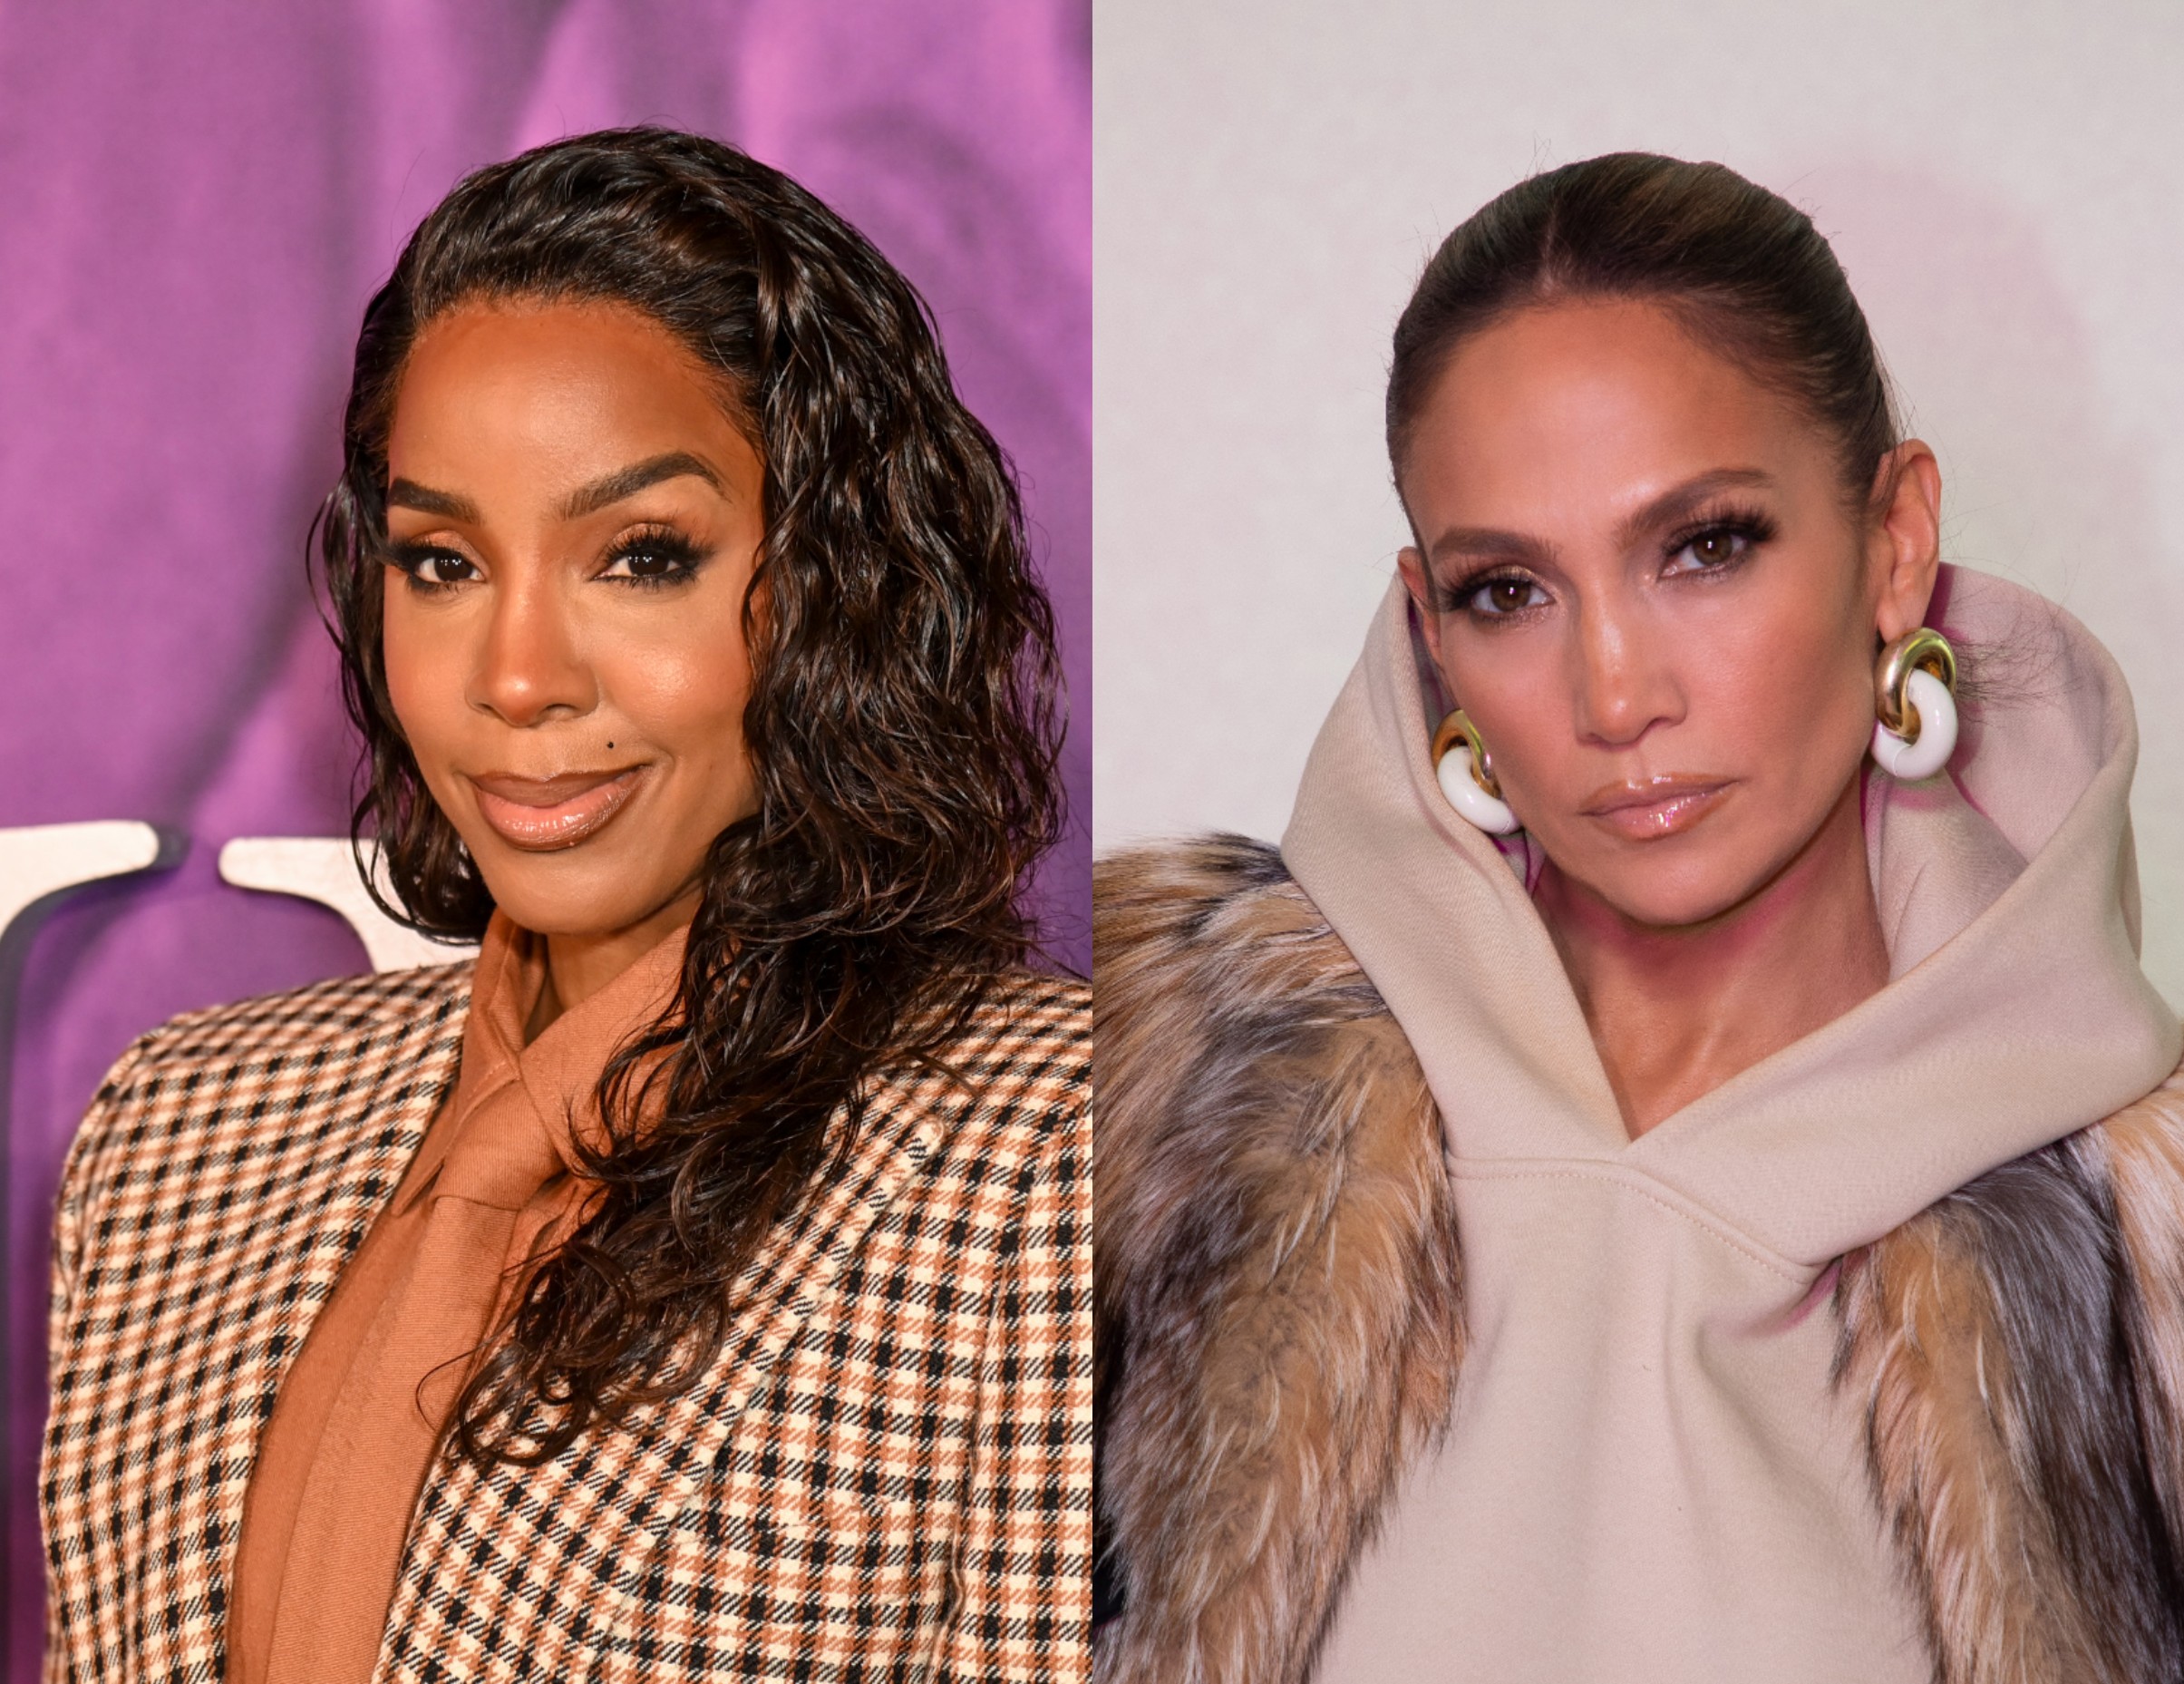 Kelly Rowland ‘Walked Out’ Hosting ‘Today Show’ Over Dressing Room Diss, Destiny’s Devoted Children Side-Eyes Shade Of JLo’s Bigger Room